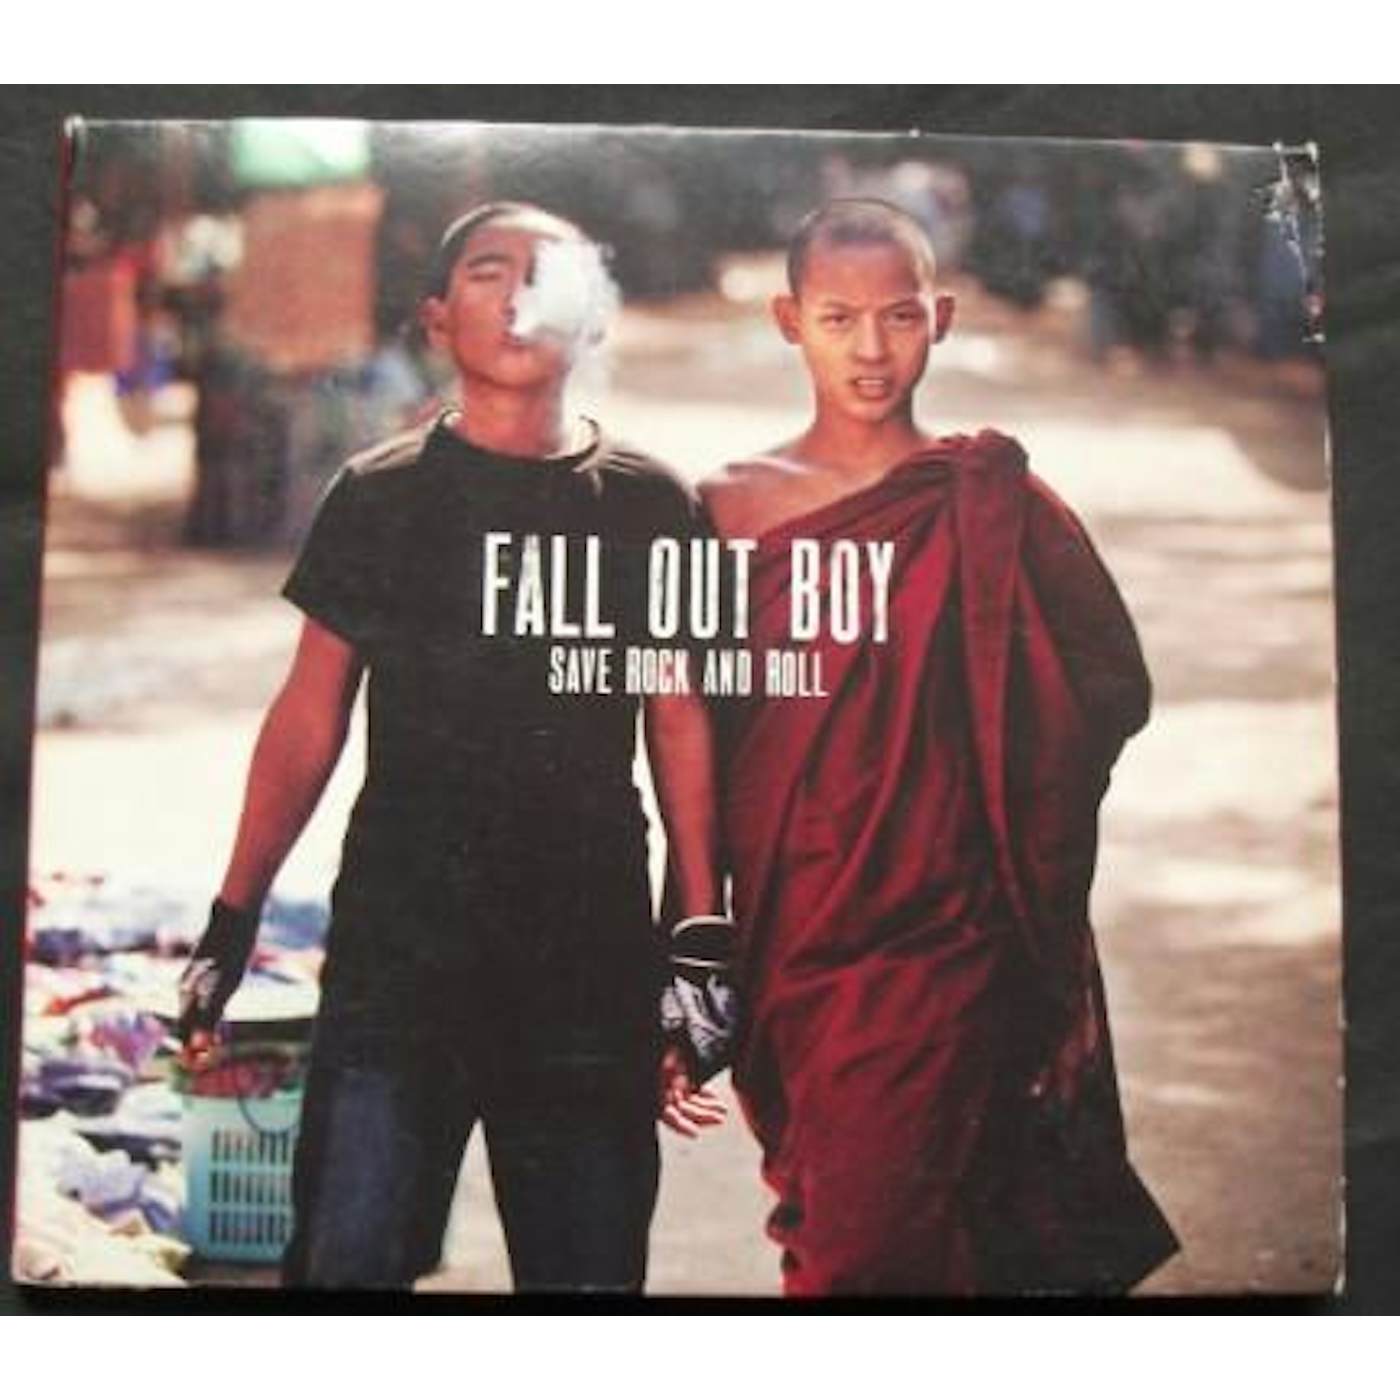 Fall Out Boy SAVE ROCK AND ROLL-CD CD